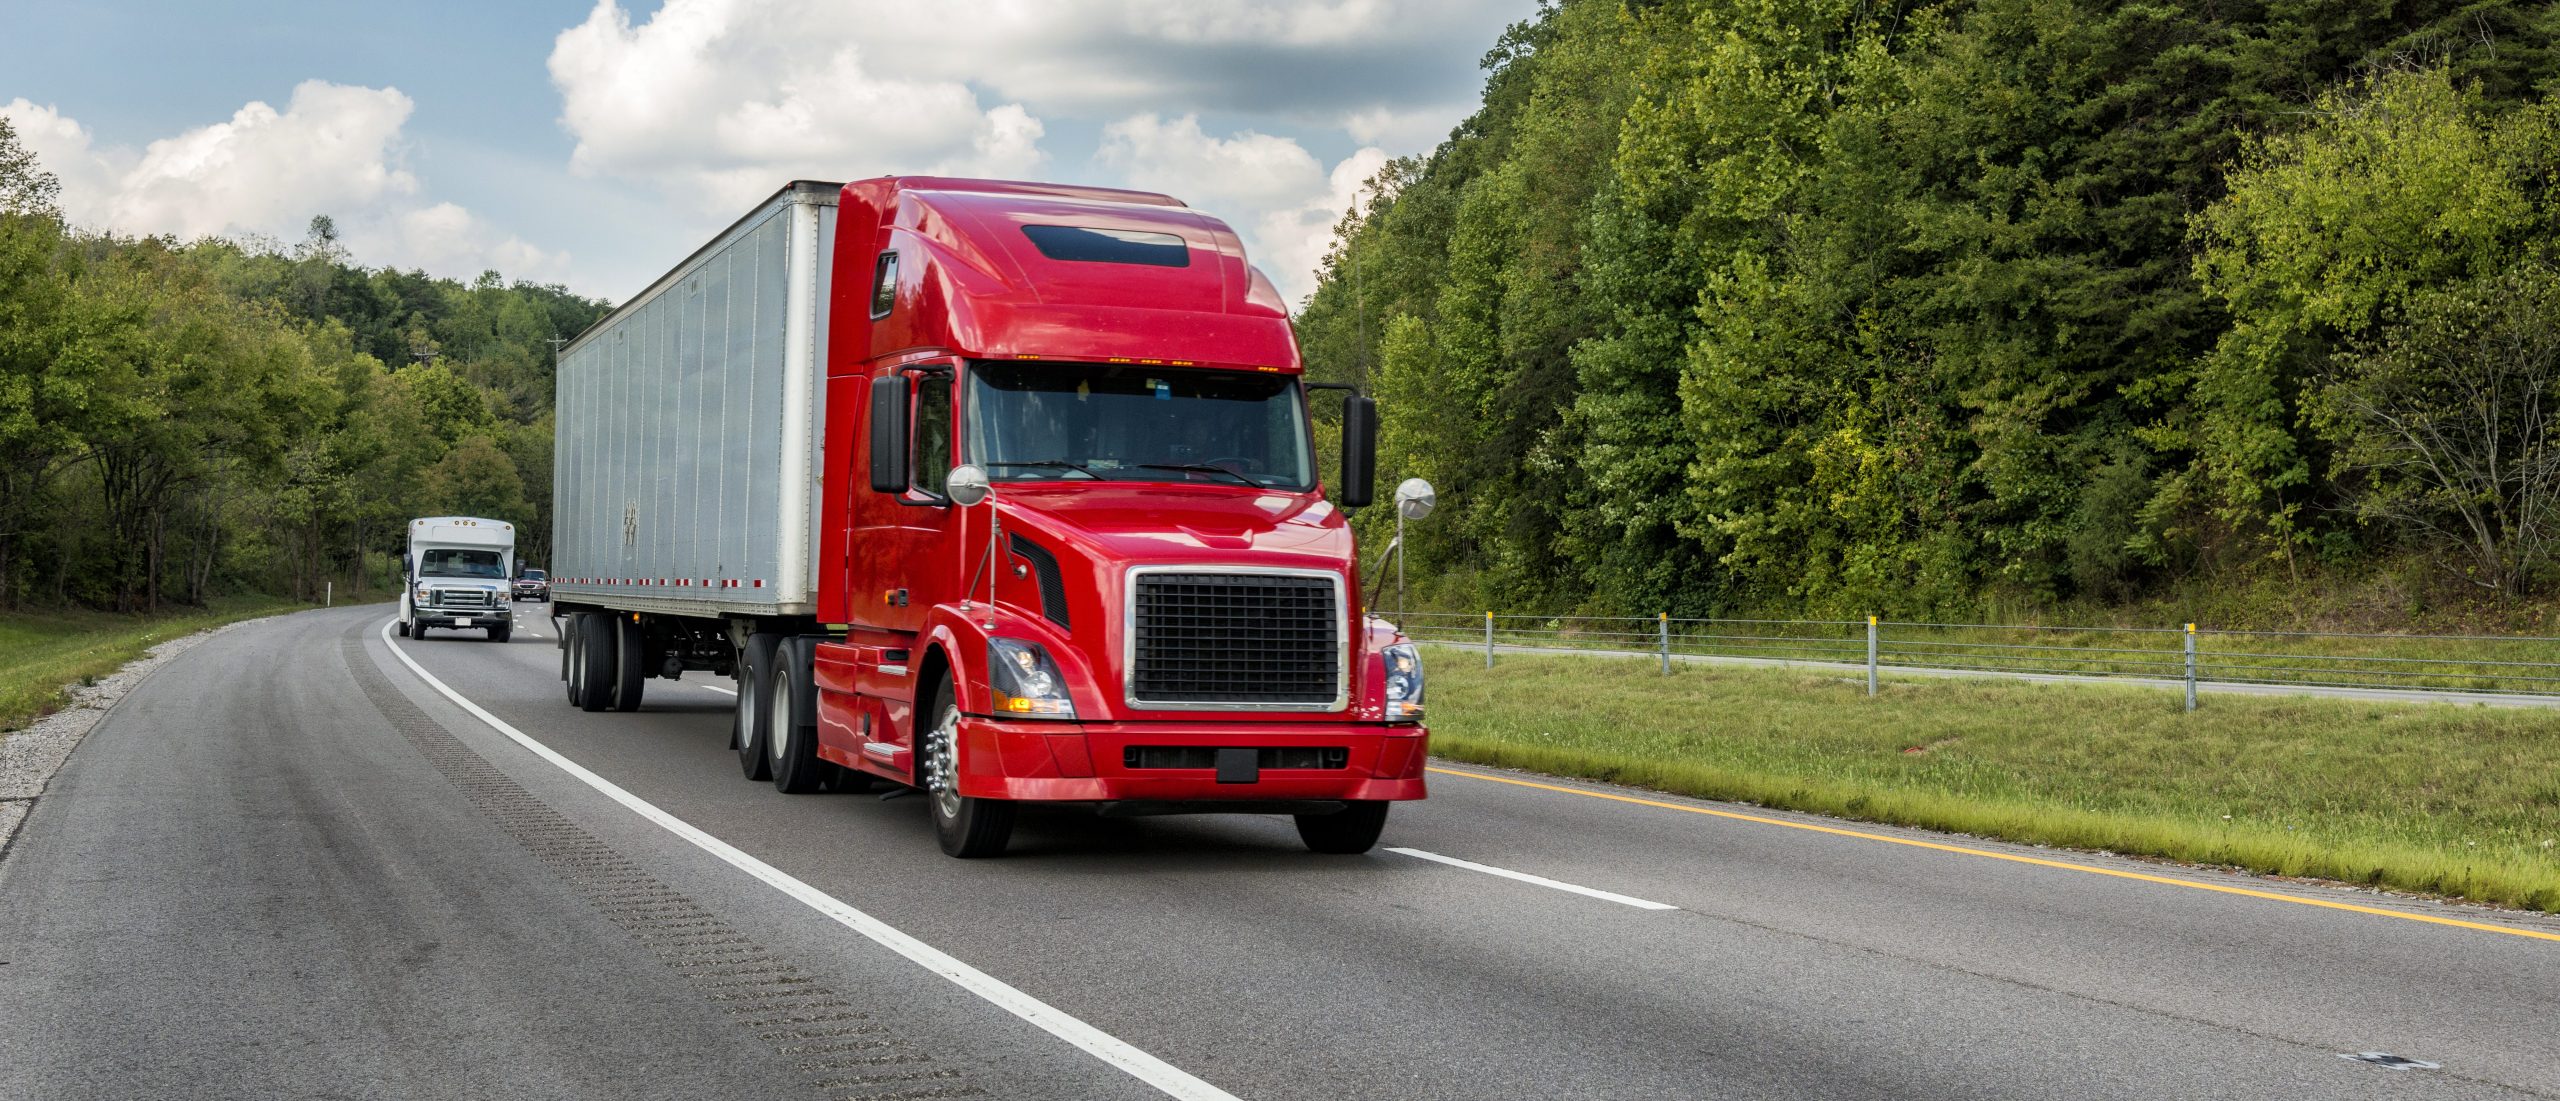 Commercial Trucks using diesel tech make up nearly half the fleets on the road.